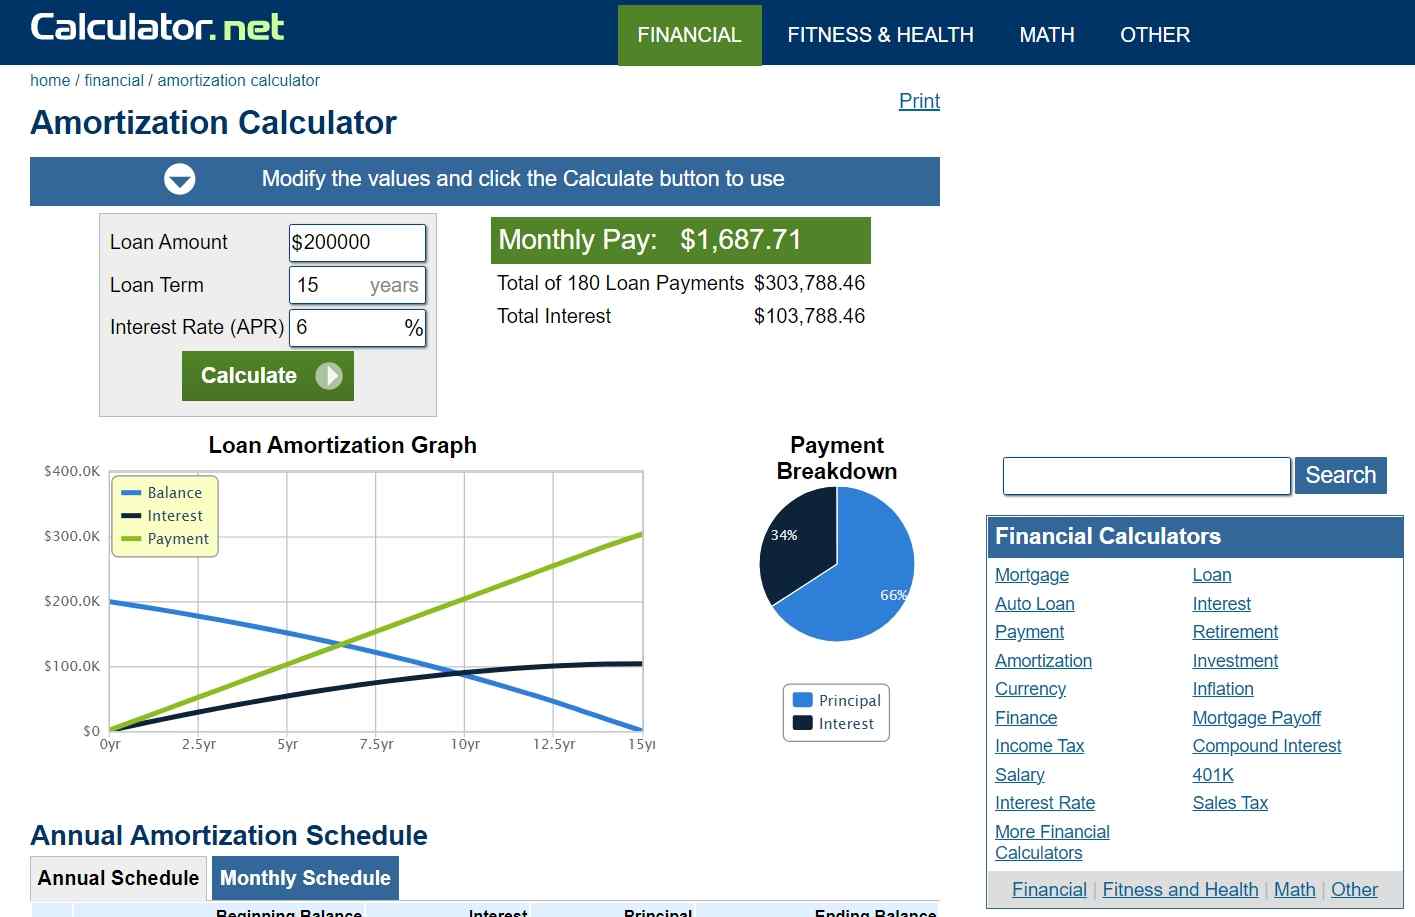 The amortization calculator is one of the most popular software used to determine how much a loan will cost over time.